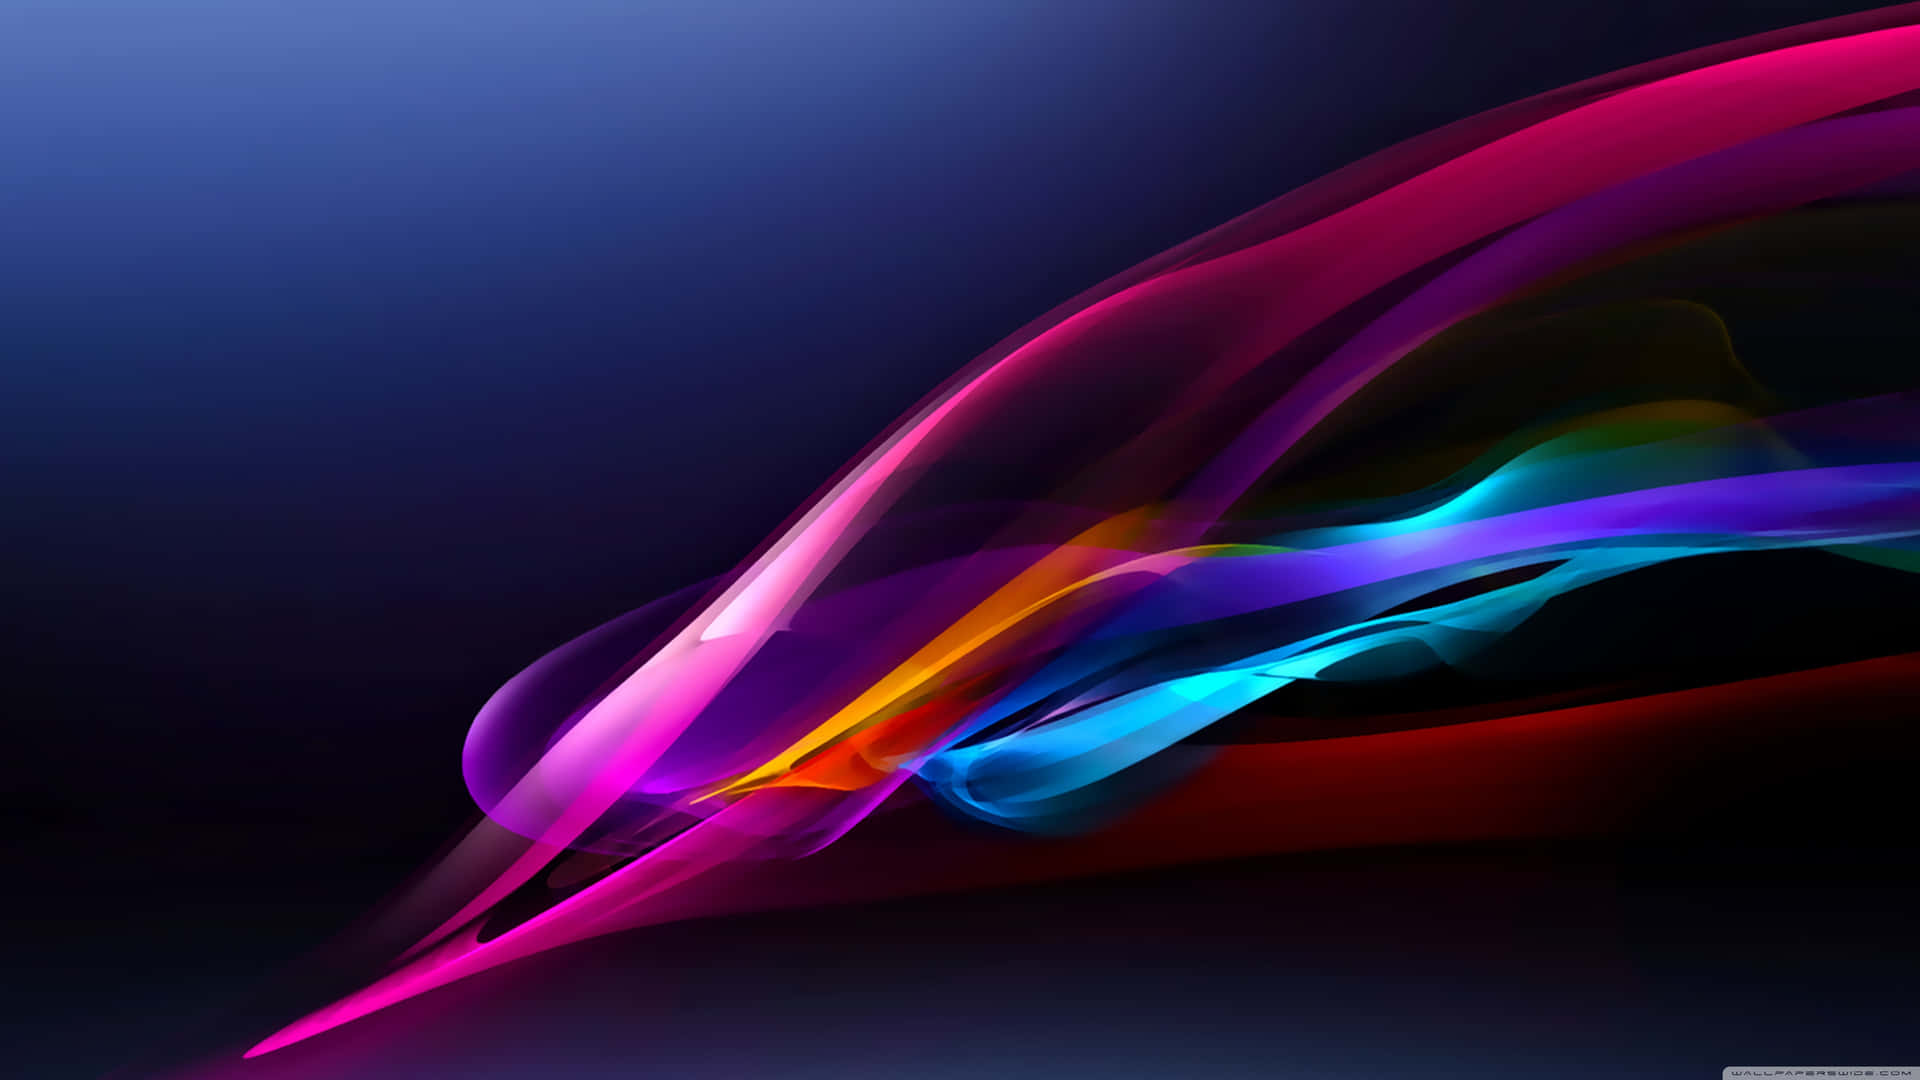 A Colorful Abstract Background With A Rainbow Colored Wave Wallpaper